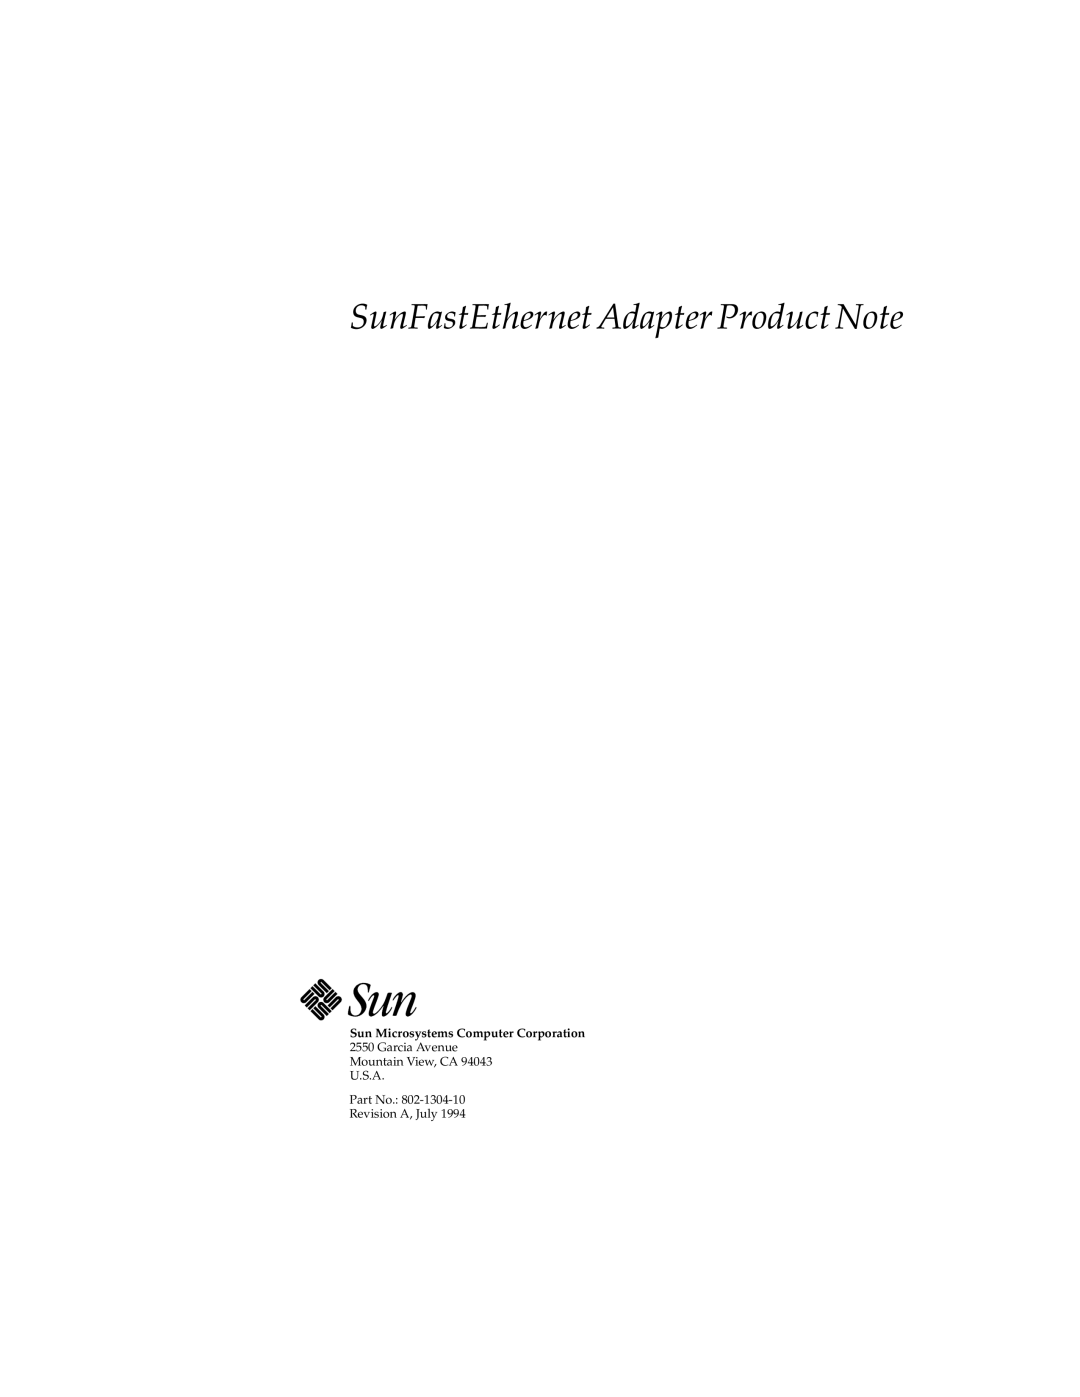 Sun Microsystems 802-1304-10 manual SunFastEthernet Adapter Product Note, Sun Microsystems Computer Corporation 